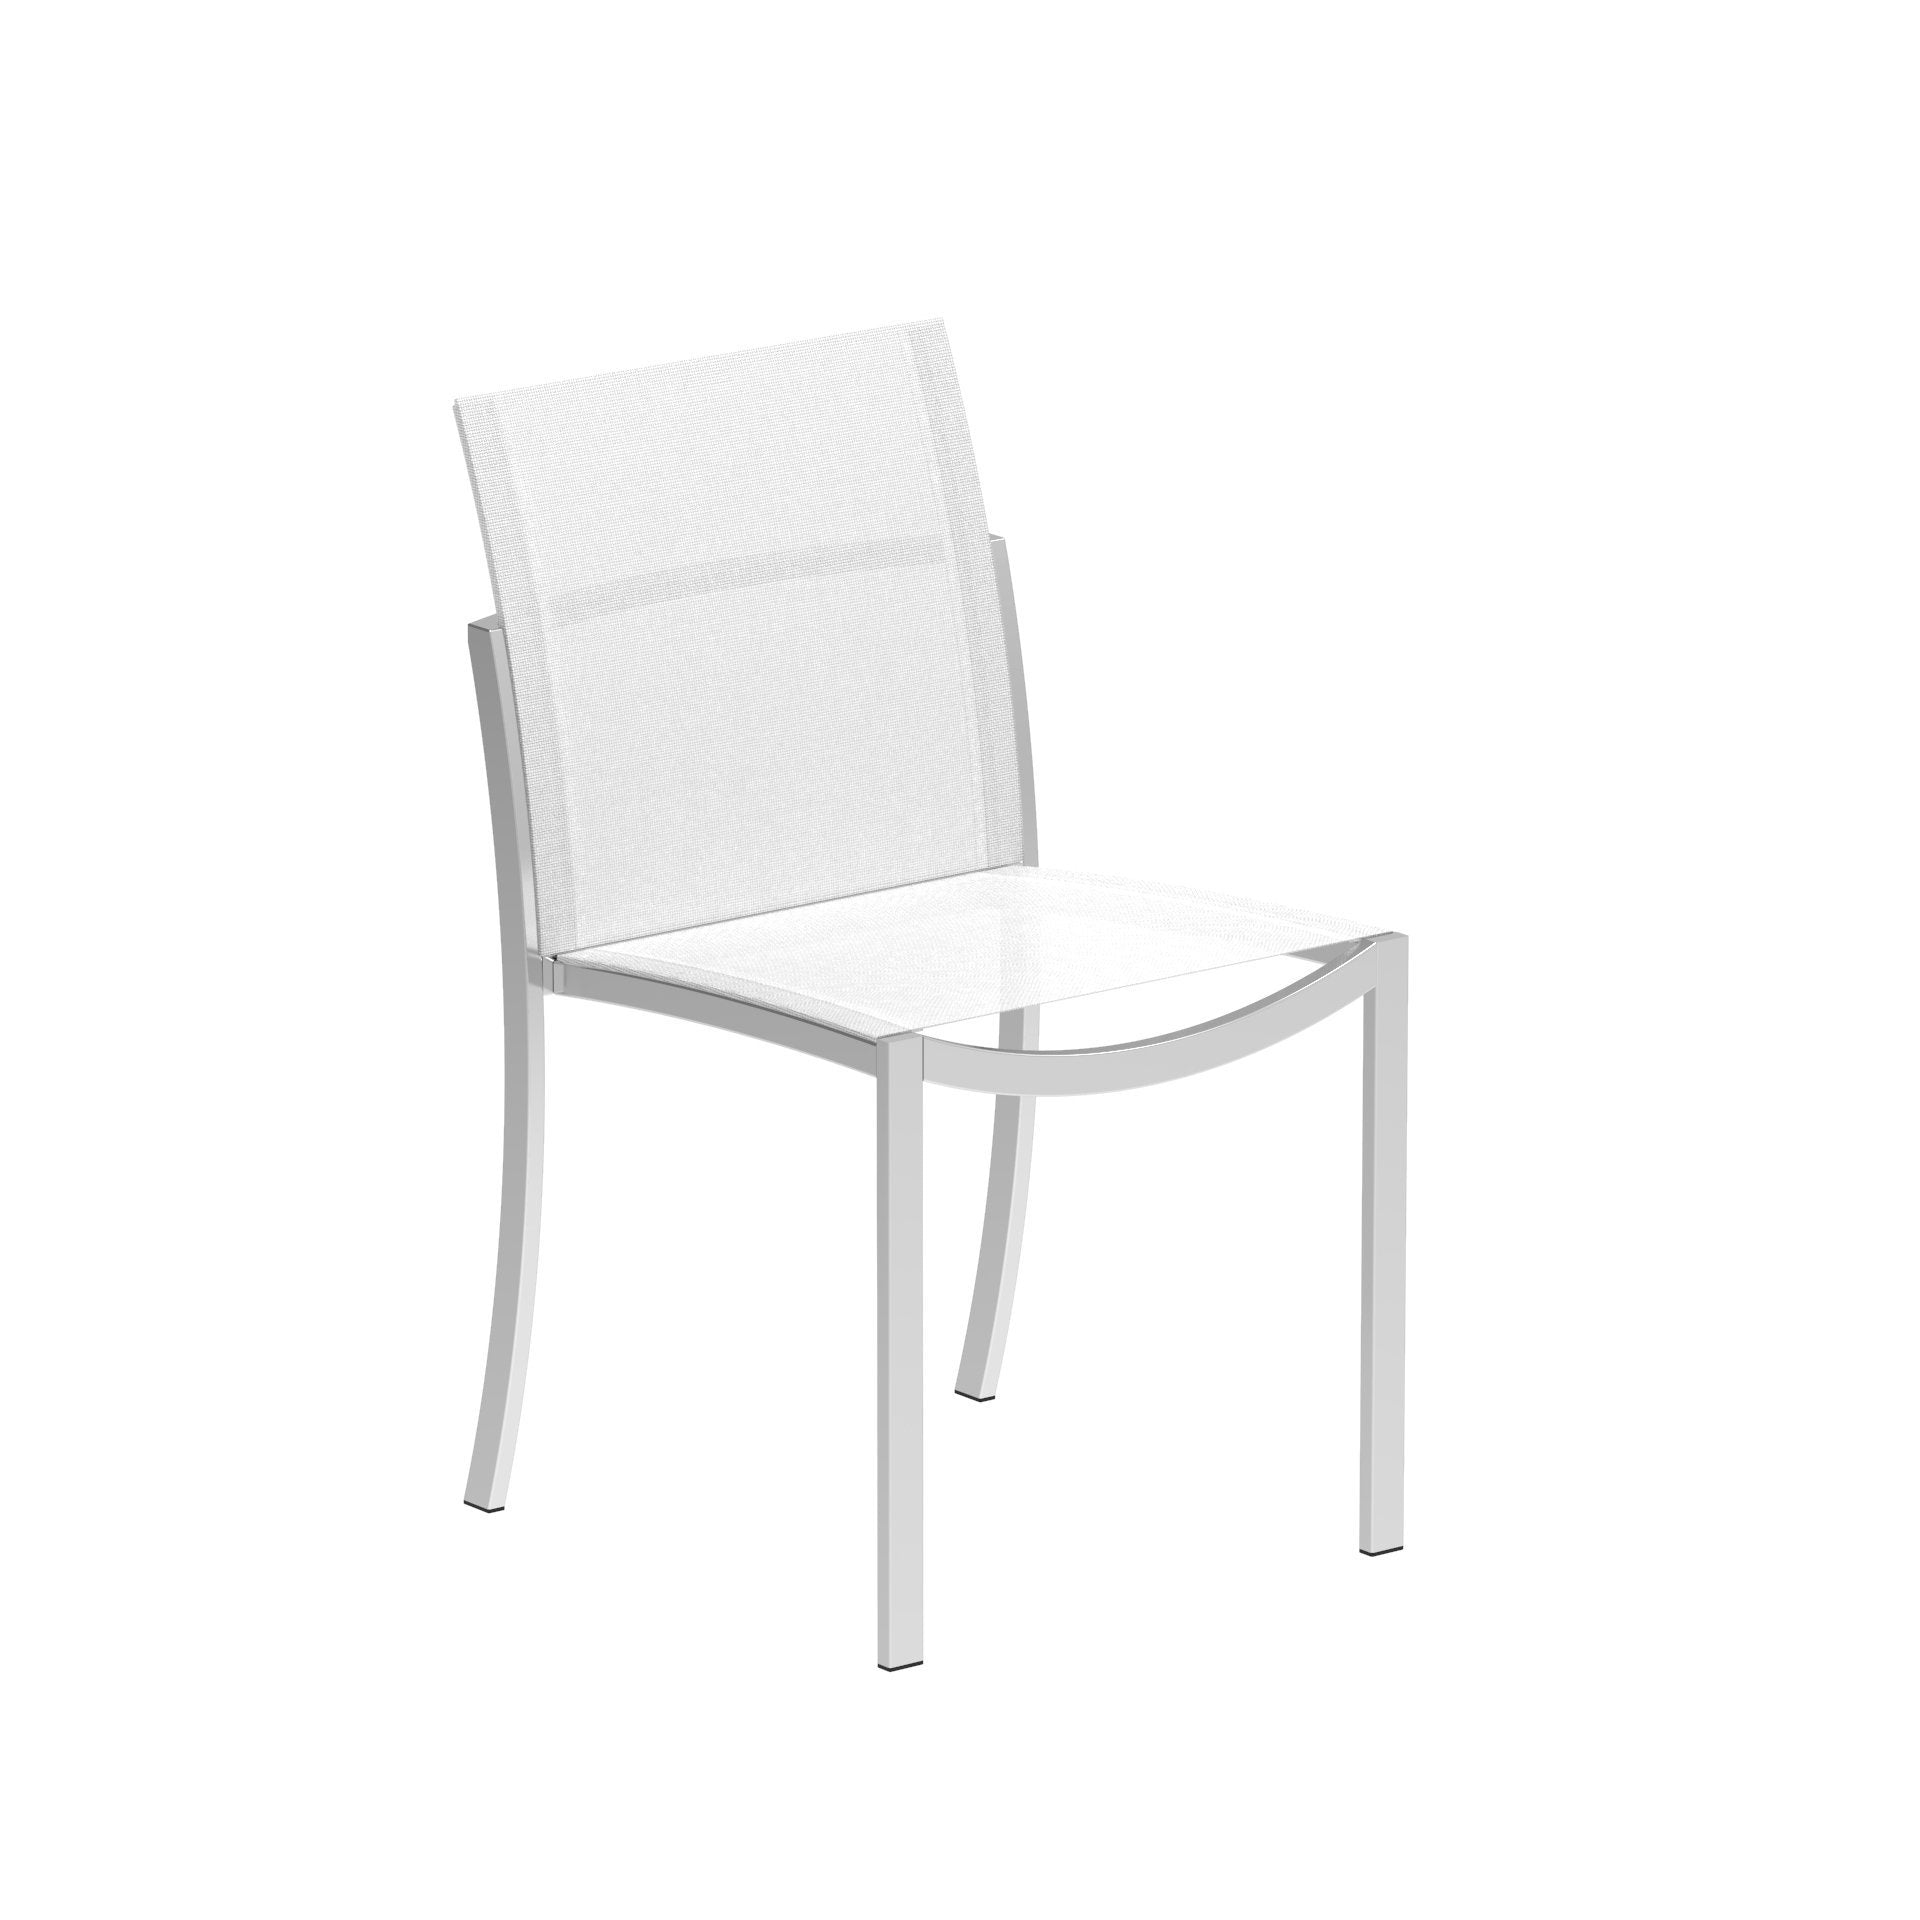 O-Zon 47 Dining Chair in White